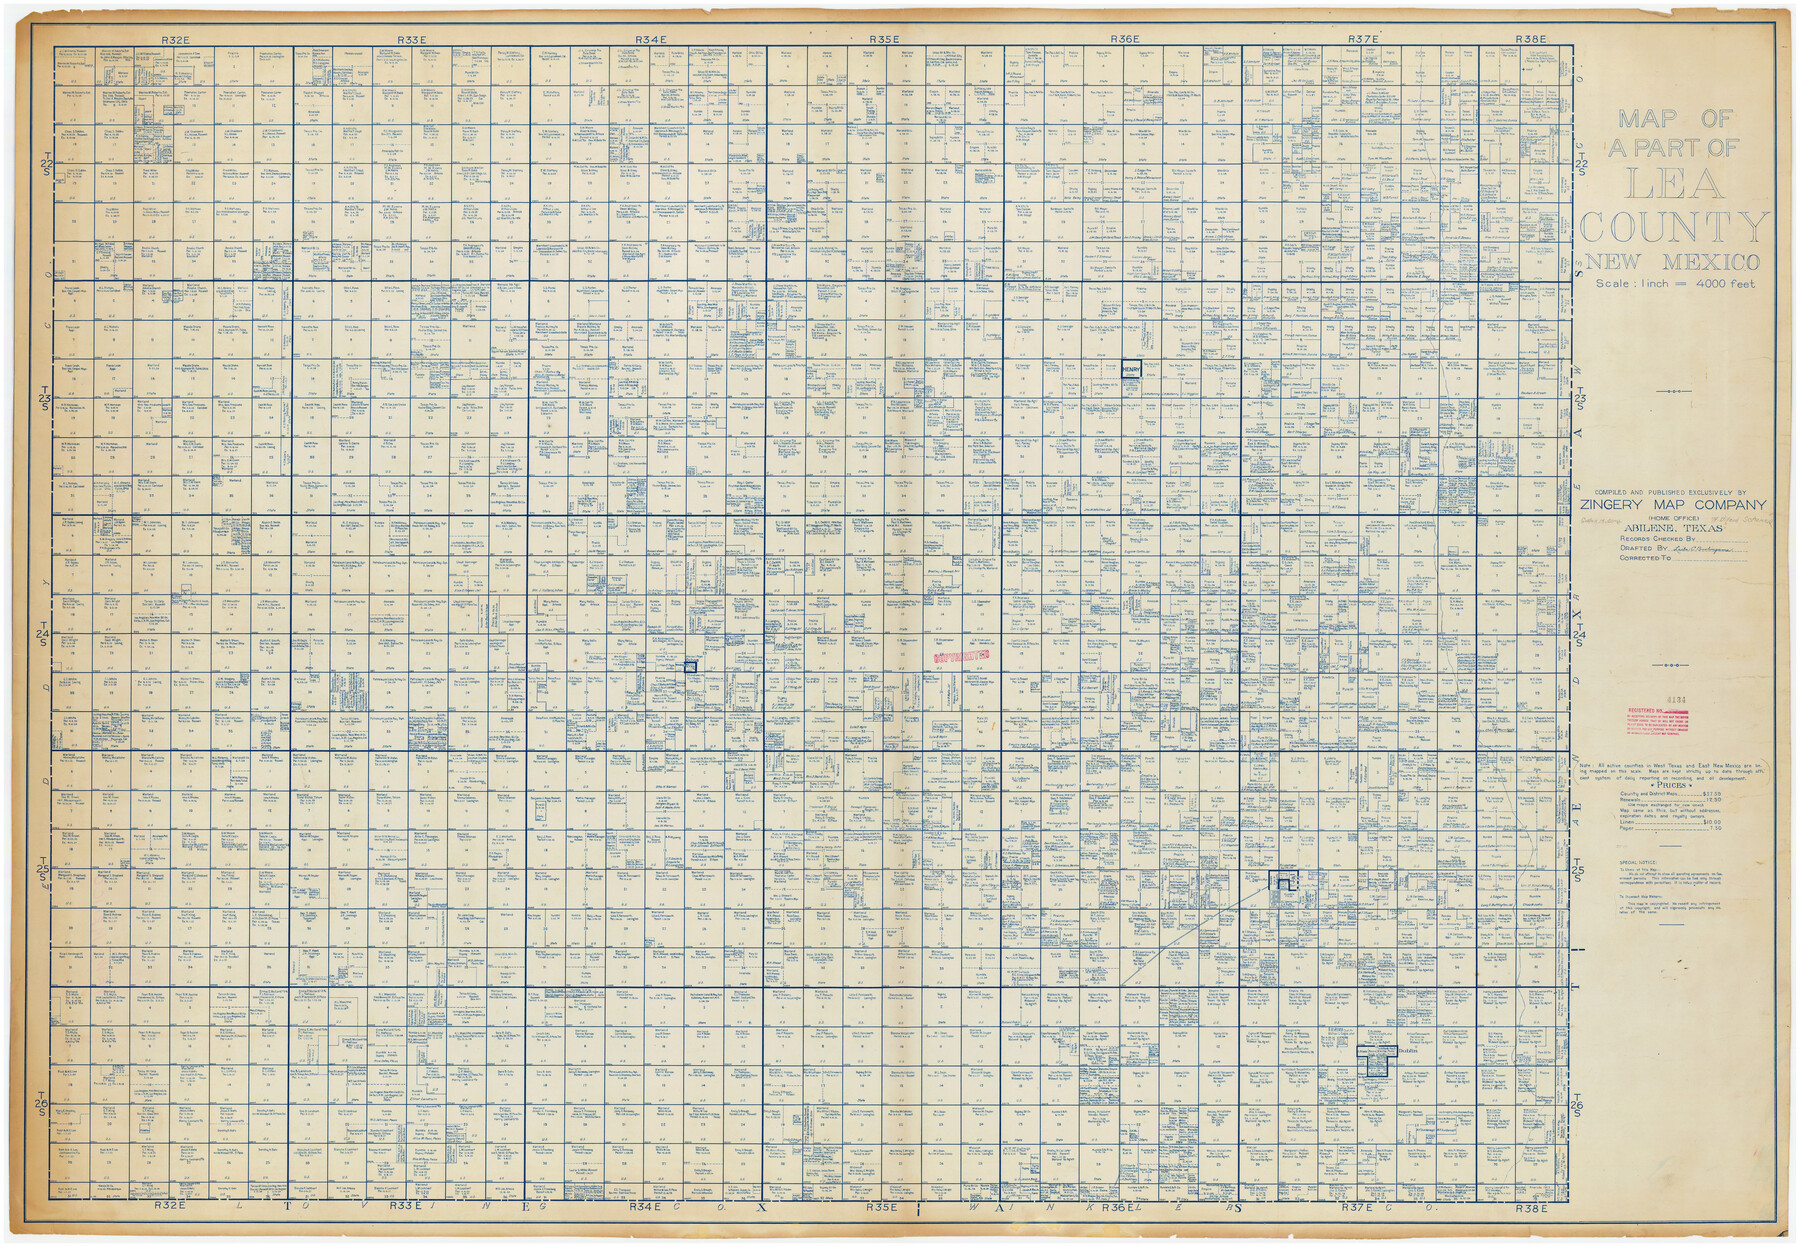 89910, Map of a Part of Lea County, New Mexico, Twichell Survey Records